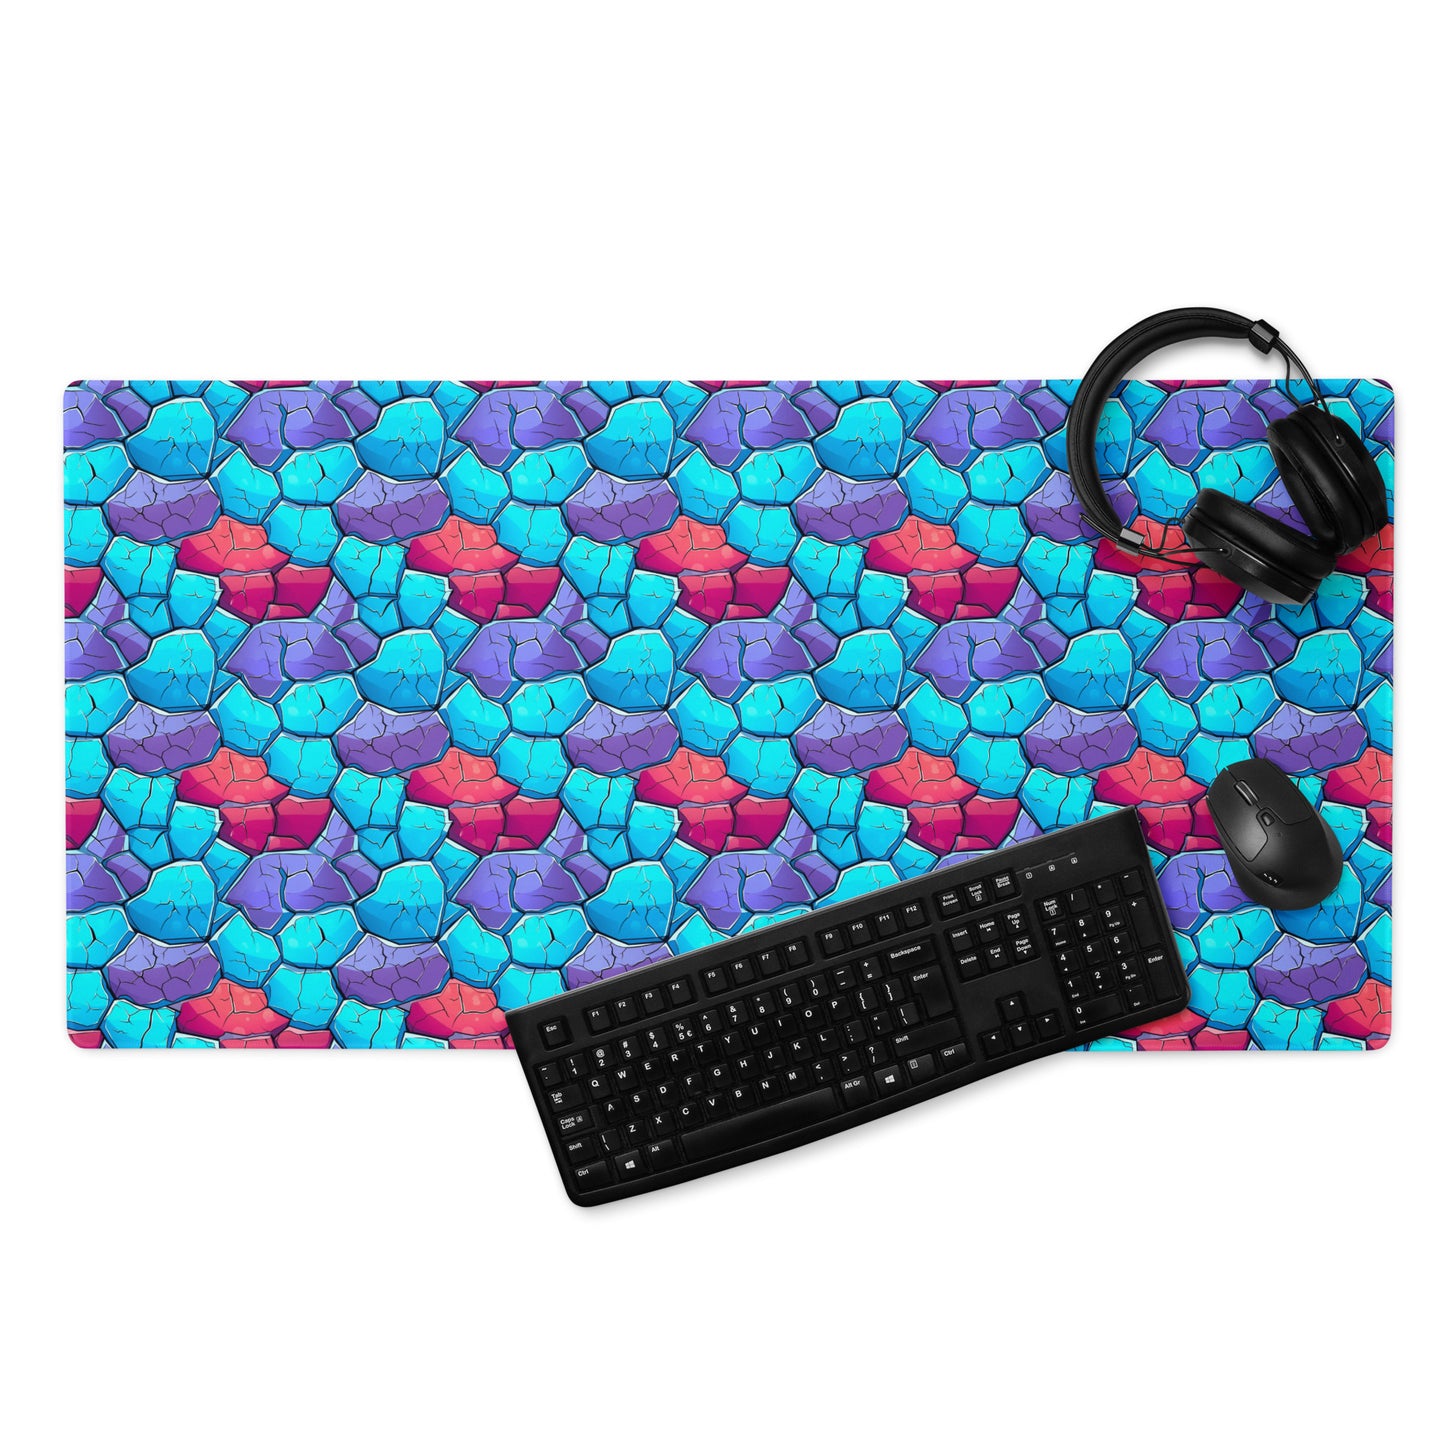 A 36" x 18" gaming desk pad with blue, red, and purple crystals. A keyboard, mouse, and headphones sit on it.